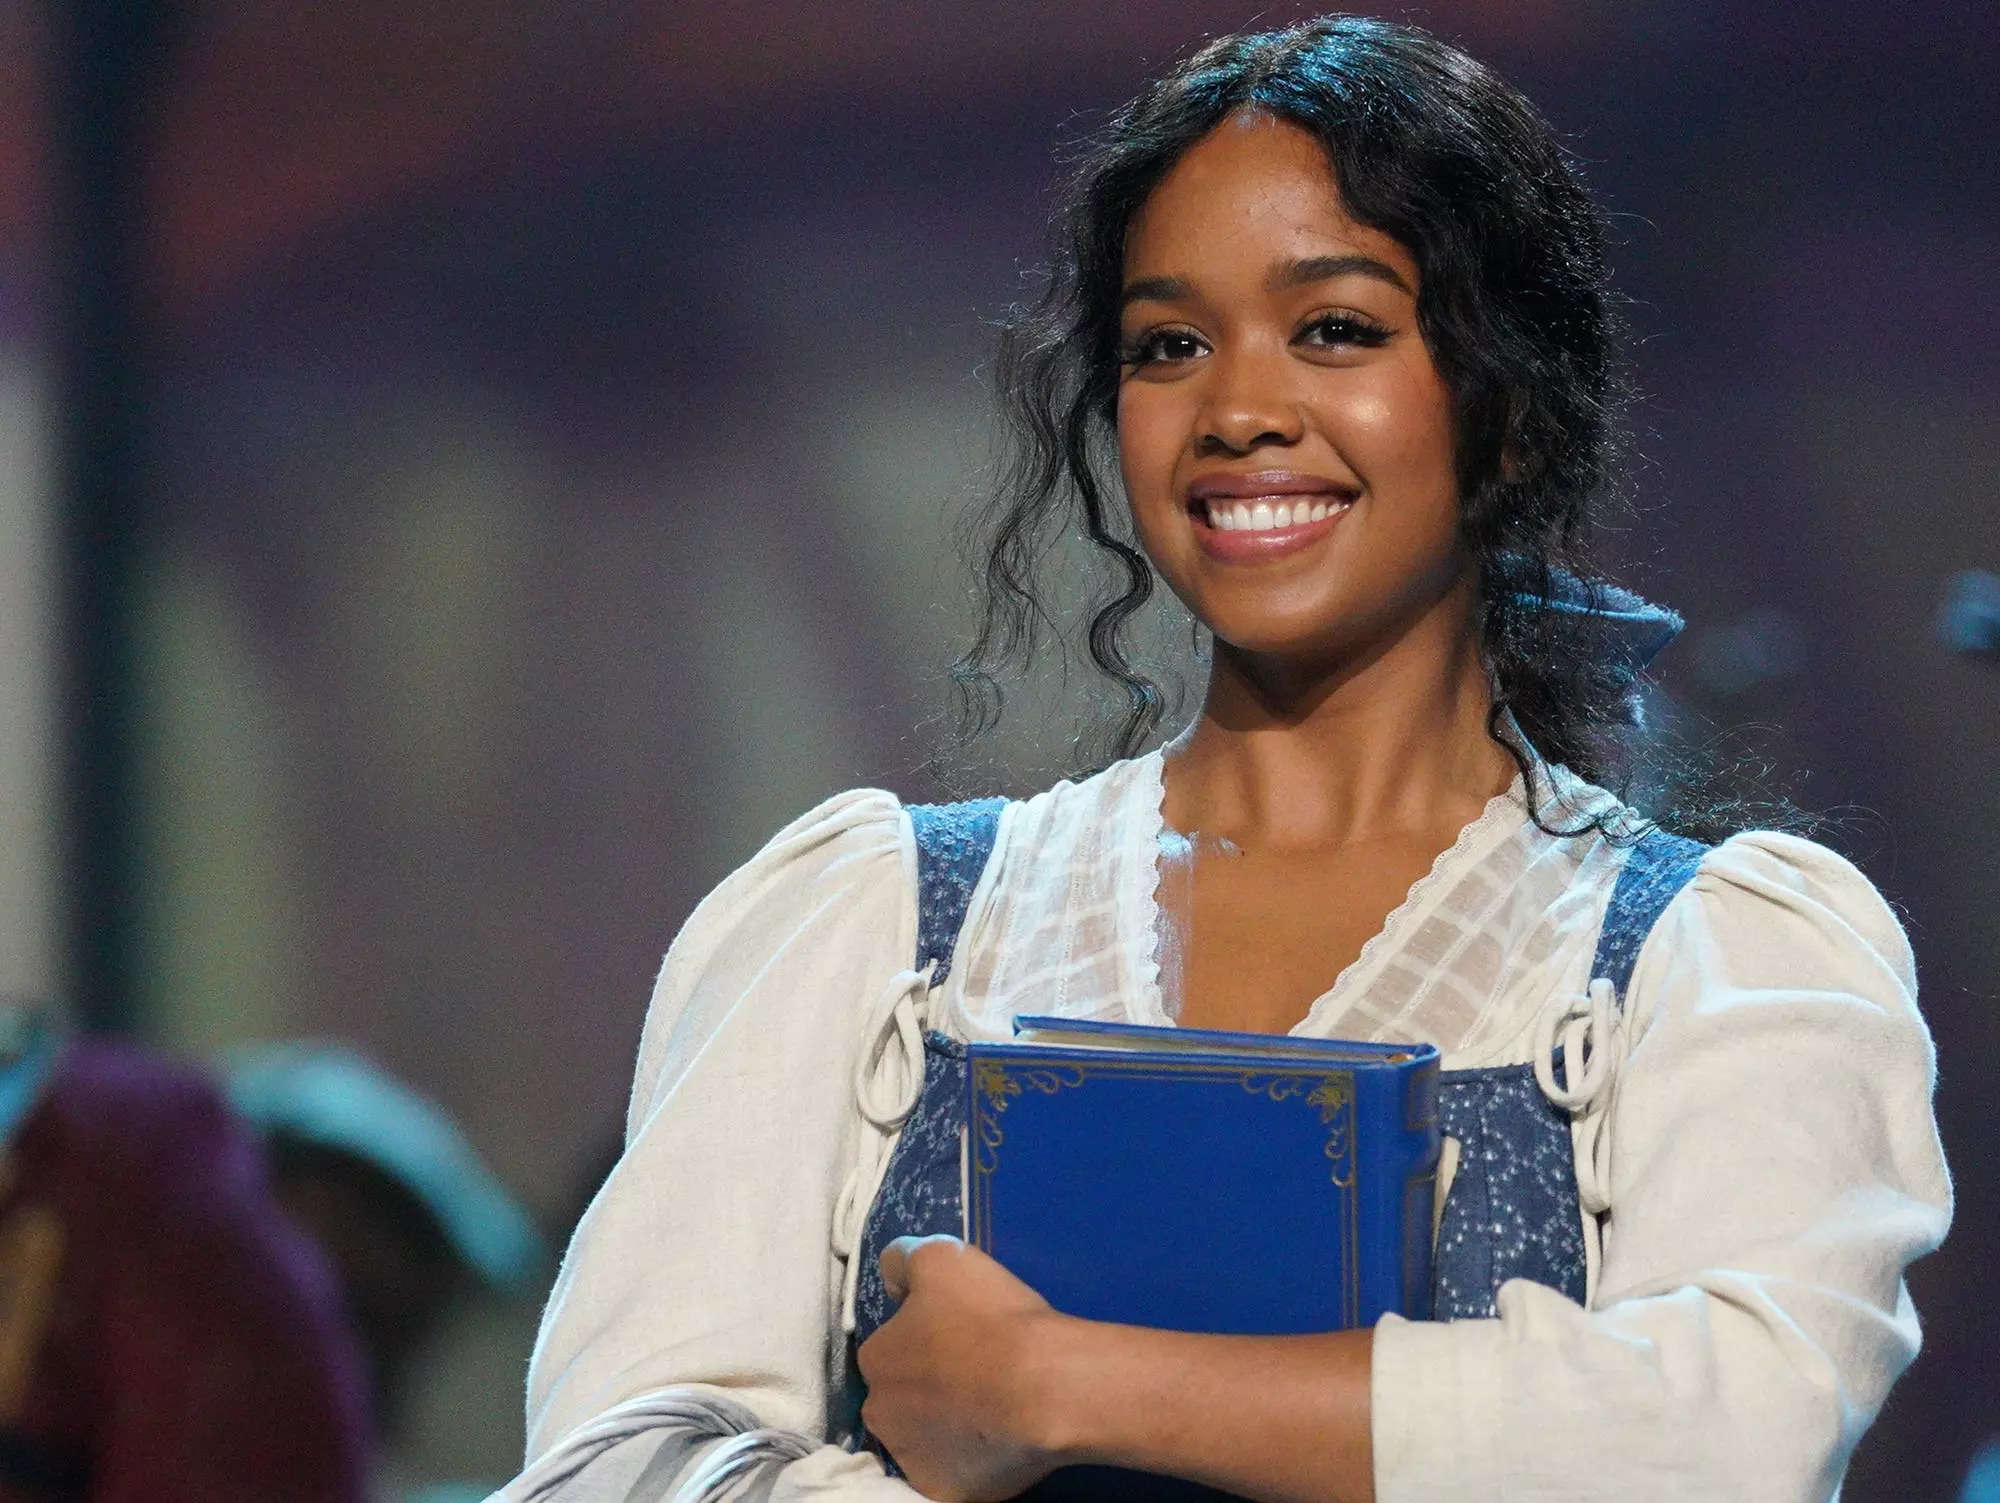 Playing Belle in 'Beauty and the Beast' special helped H.E.R.